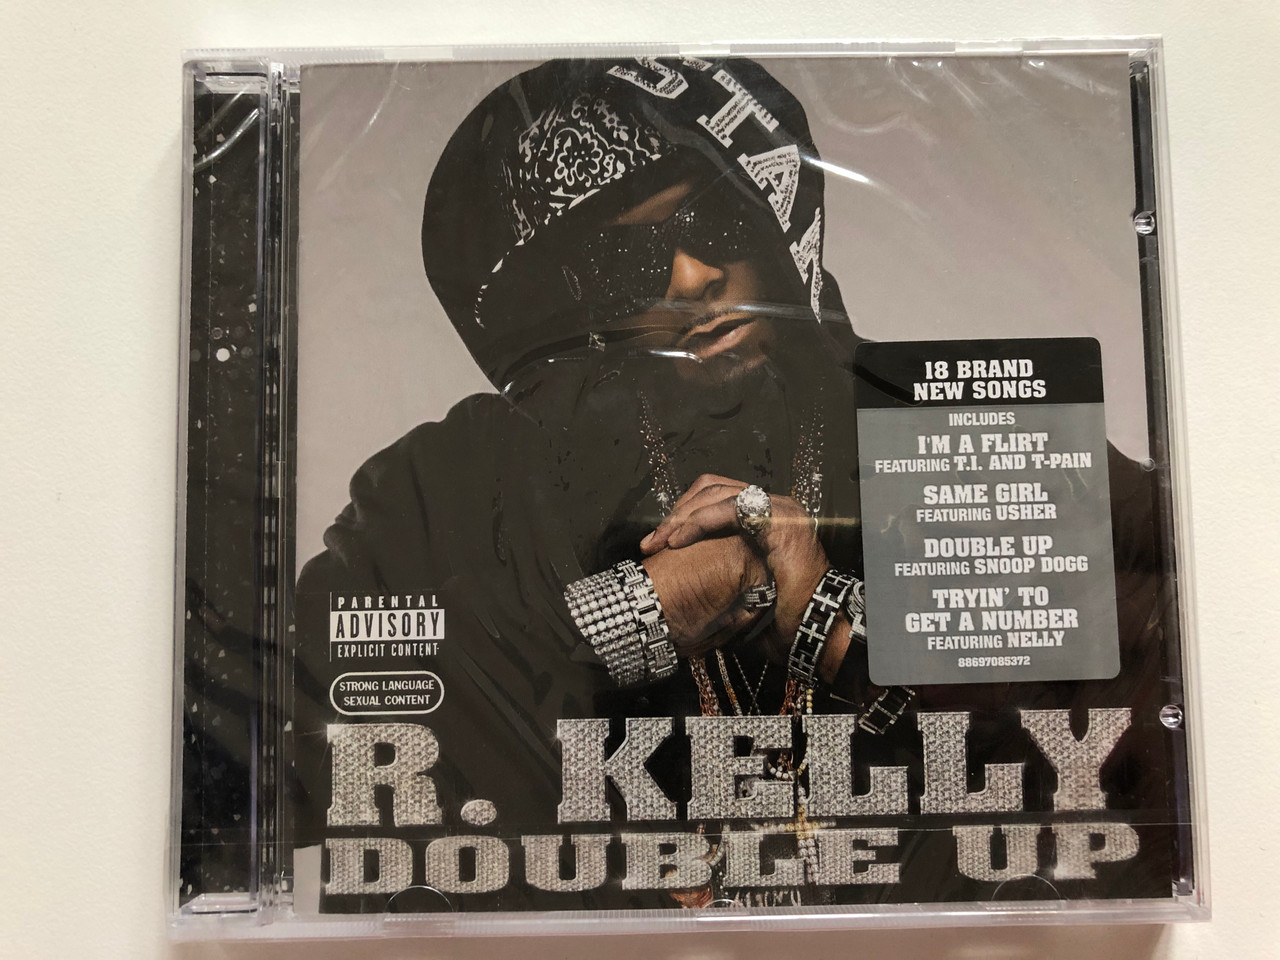 https://cdn10.bigcommerce.com/s-62bdpkt7pb/products/0/images/207820/R._Kelly_Double_Up_18_Brand_New_Songs_Includes_Im_A_Flirt_Featuring_T._I._and_T-Pain_Same_Girl_Featuring_Snoop_Dogg_Tryin_To_Get_A_Number_Featuring_Nelly_Jive_Audio_CD_2007_88_1__22206.1642493013.1280.1280.JPG?c=2&_gl=1*1cv4hcu*_ga*MjA2NTIxMjE2MC4xNTkwNTEyNTMy*_ga_WS2VZYPC6G*MTY0MjQ4NzMxNy4yNjUuMS4xNjQyNDkyODAzLjQ5